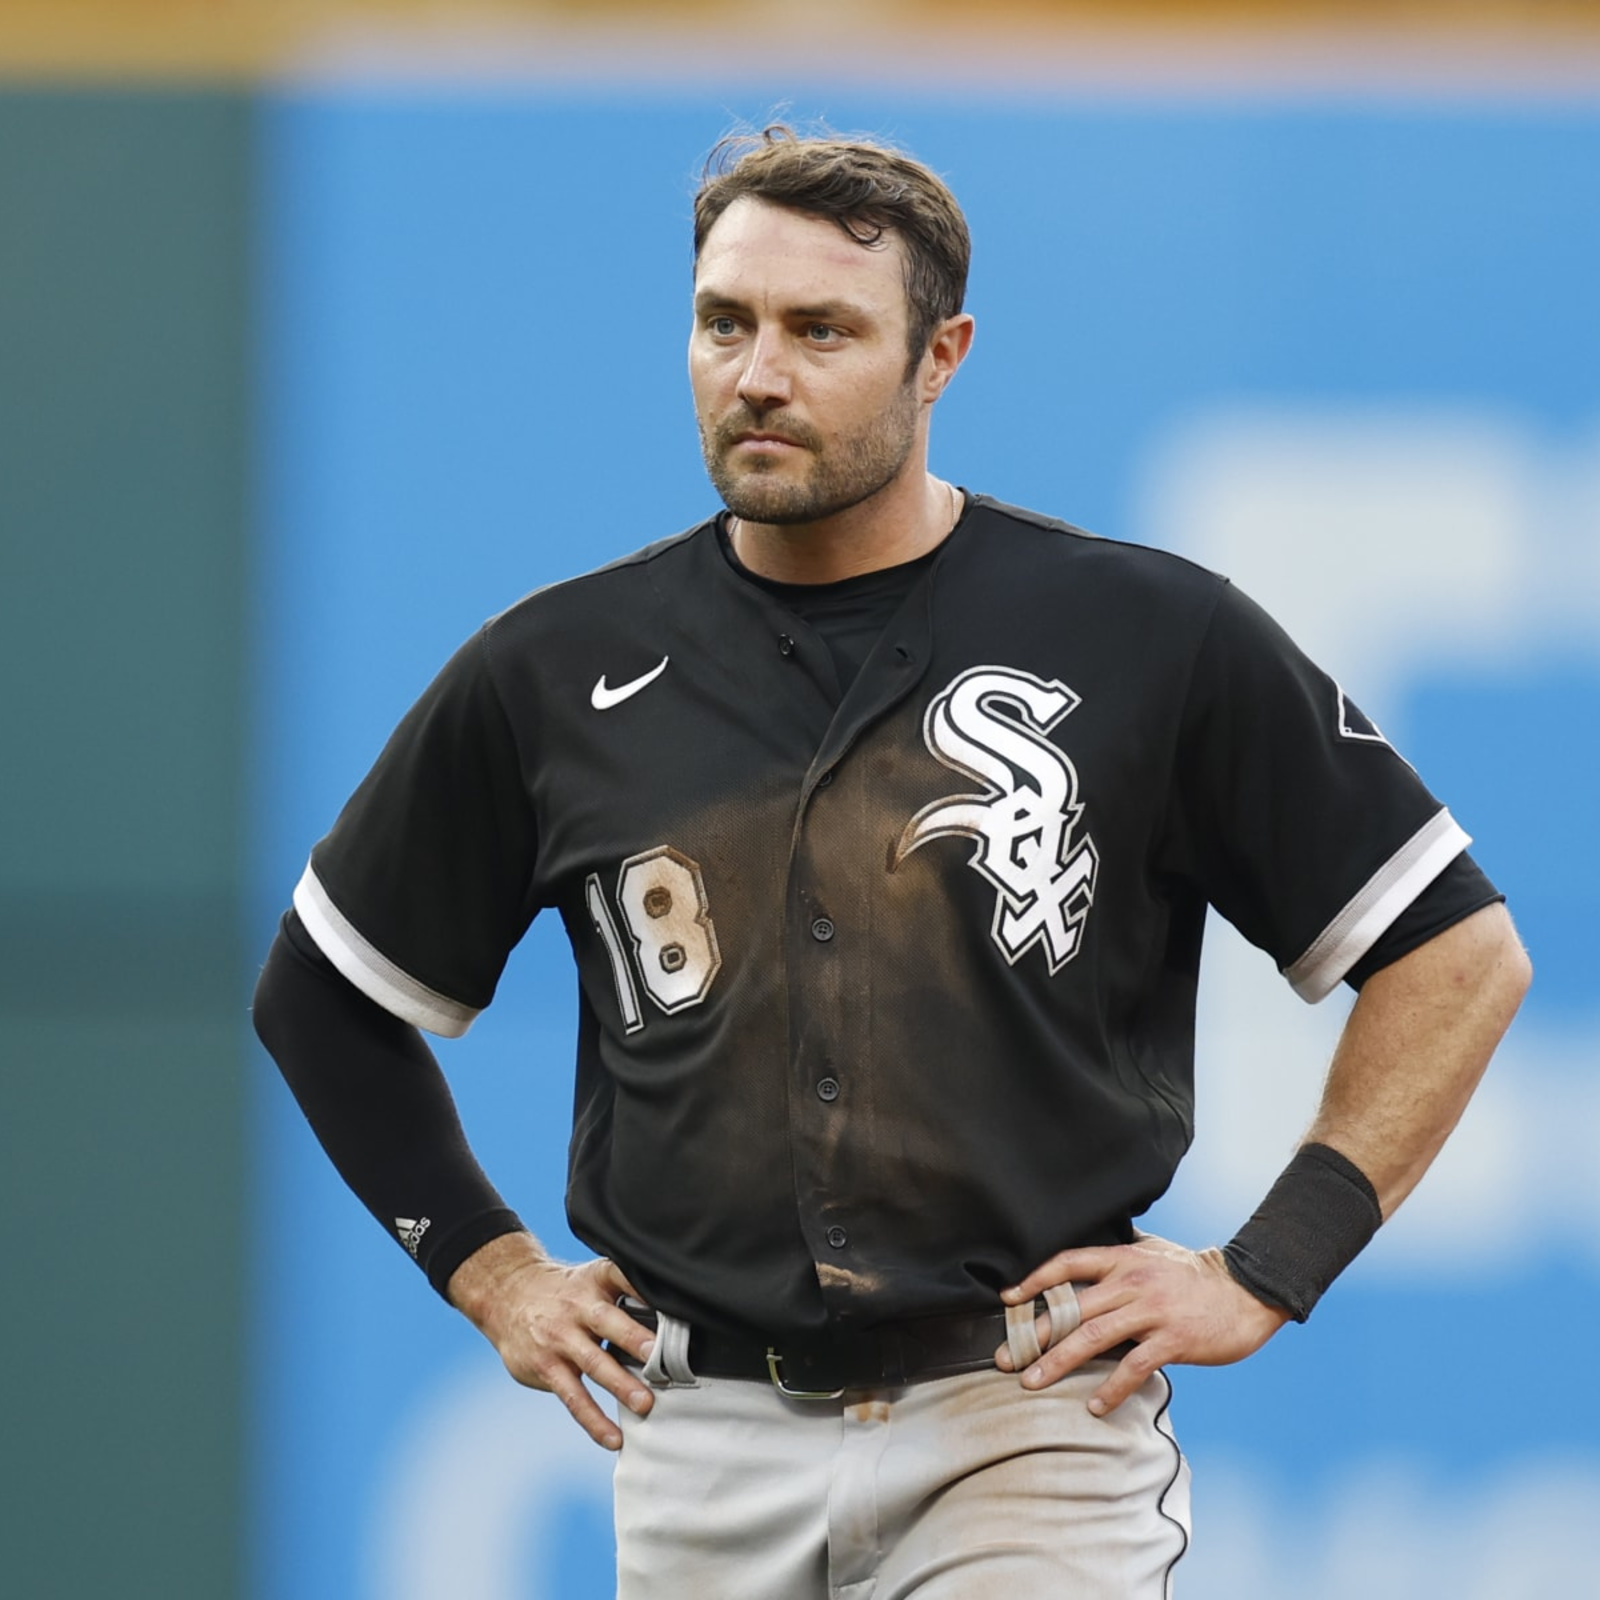 Outfielder AJ Pollock declines $13 million option with White Sox